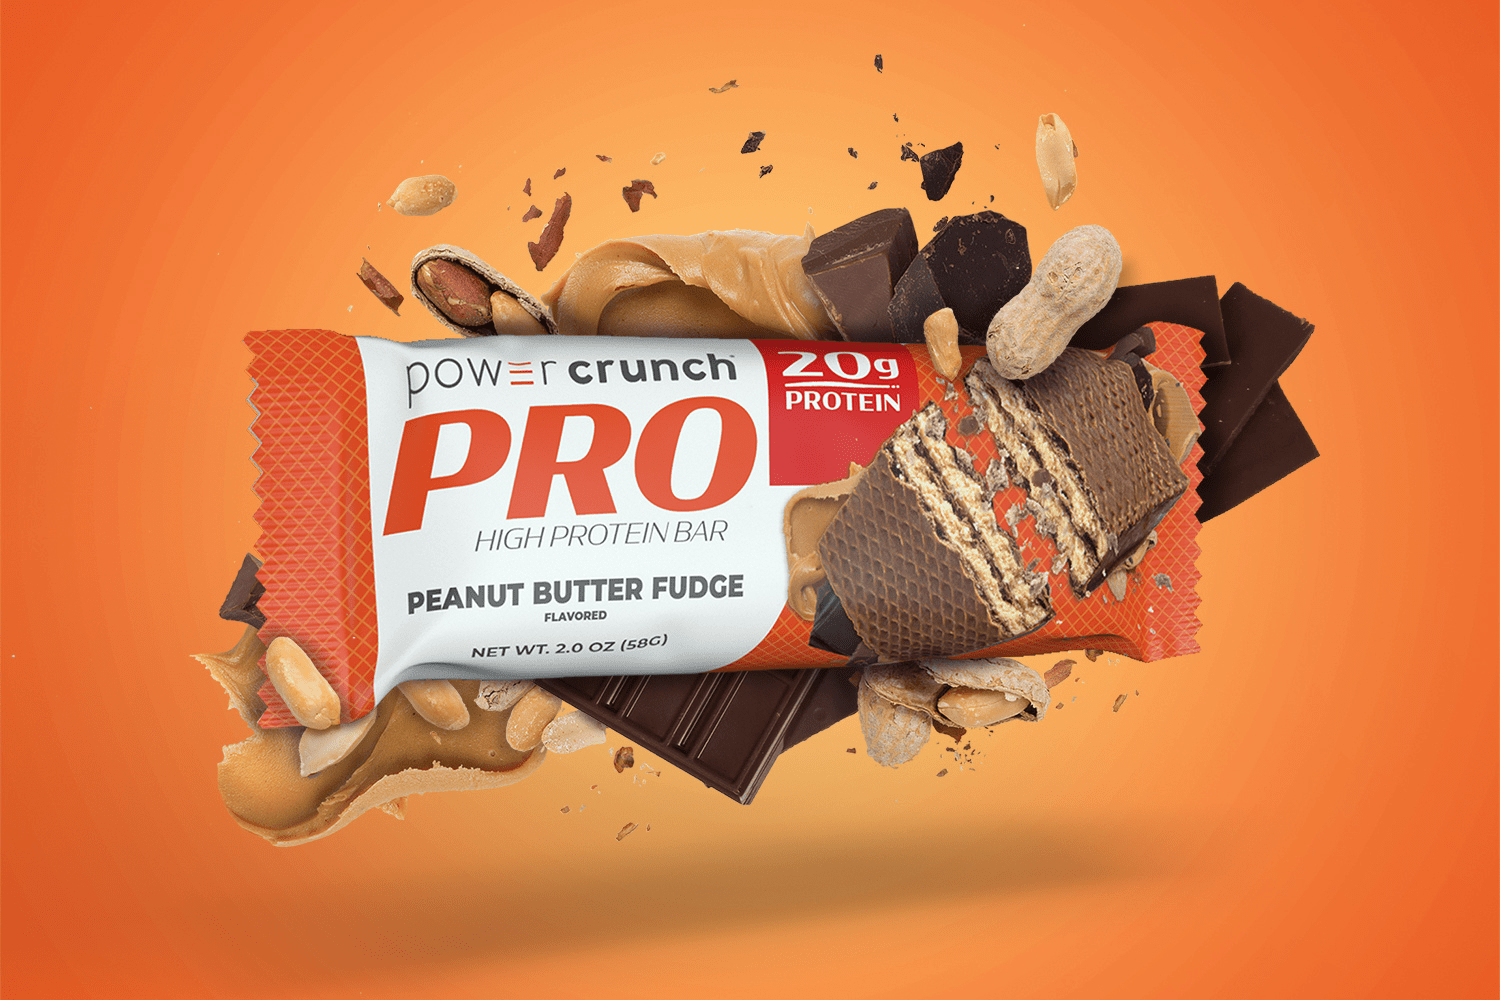 PRO Peanut Butter Fudge 20g protein bars pictured with Peanut Butter Fudge flavor explosion